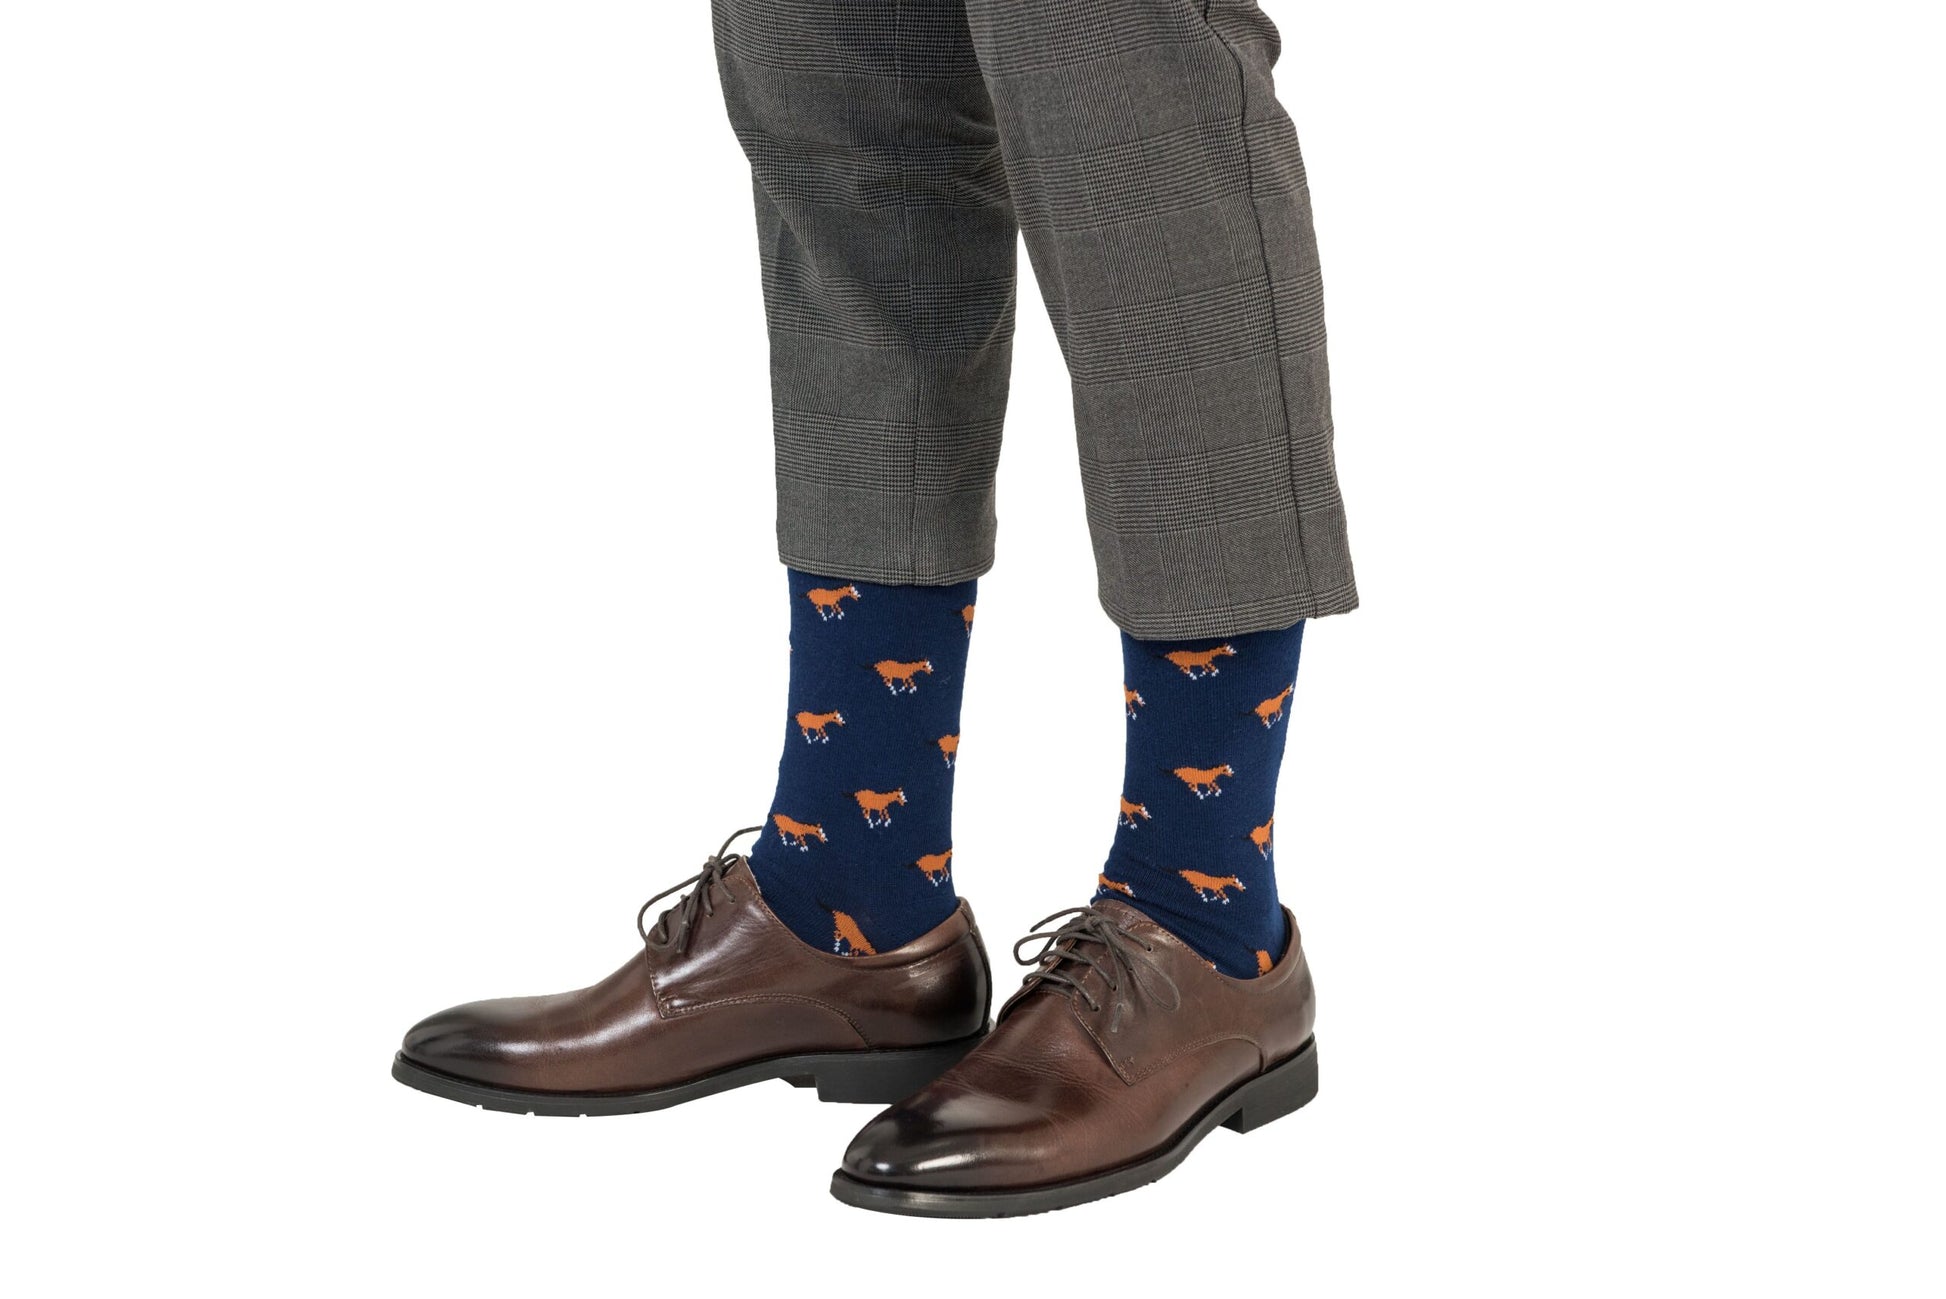 A man wearing a pair of Horse Socks.